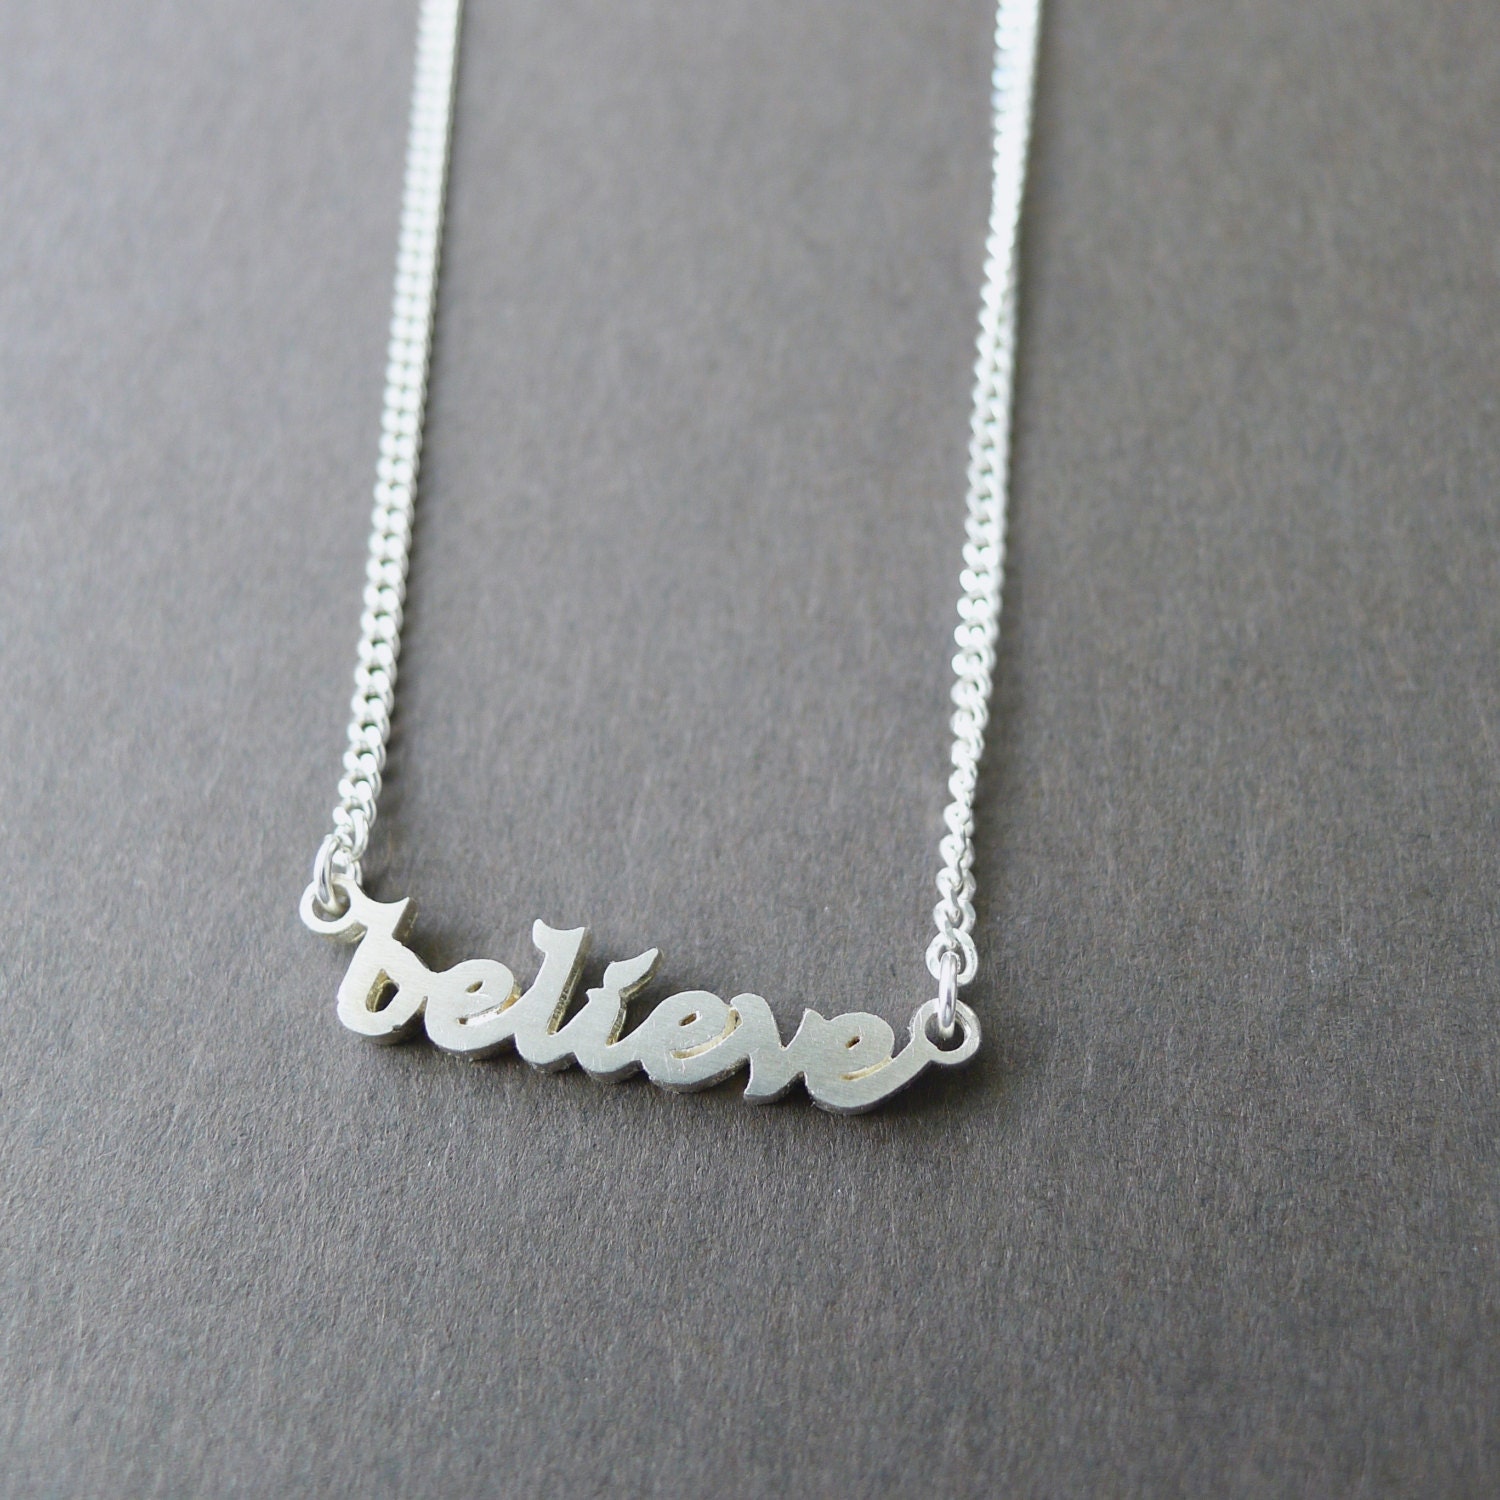 Sterling Silver Believe Necklace, Graduation Gift, Believe in Yourself, Handwritten Necklace, Inspirational Jewelry, Grad Gift, Word